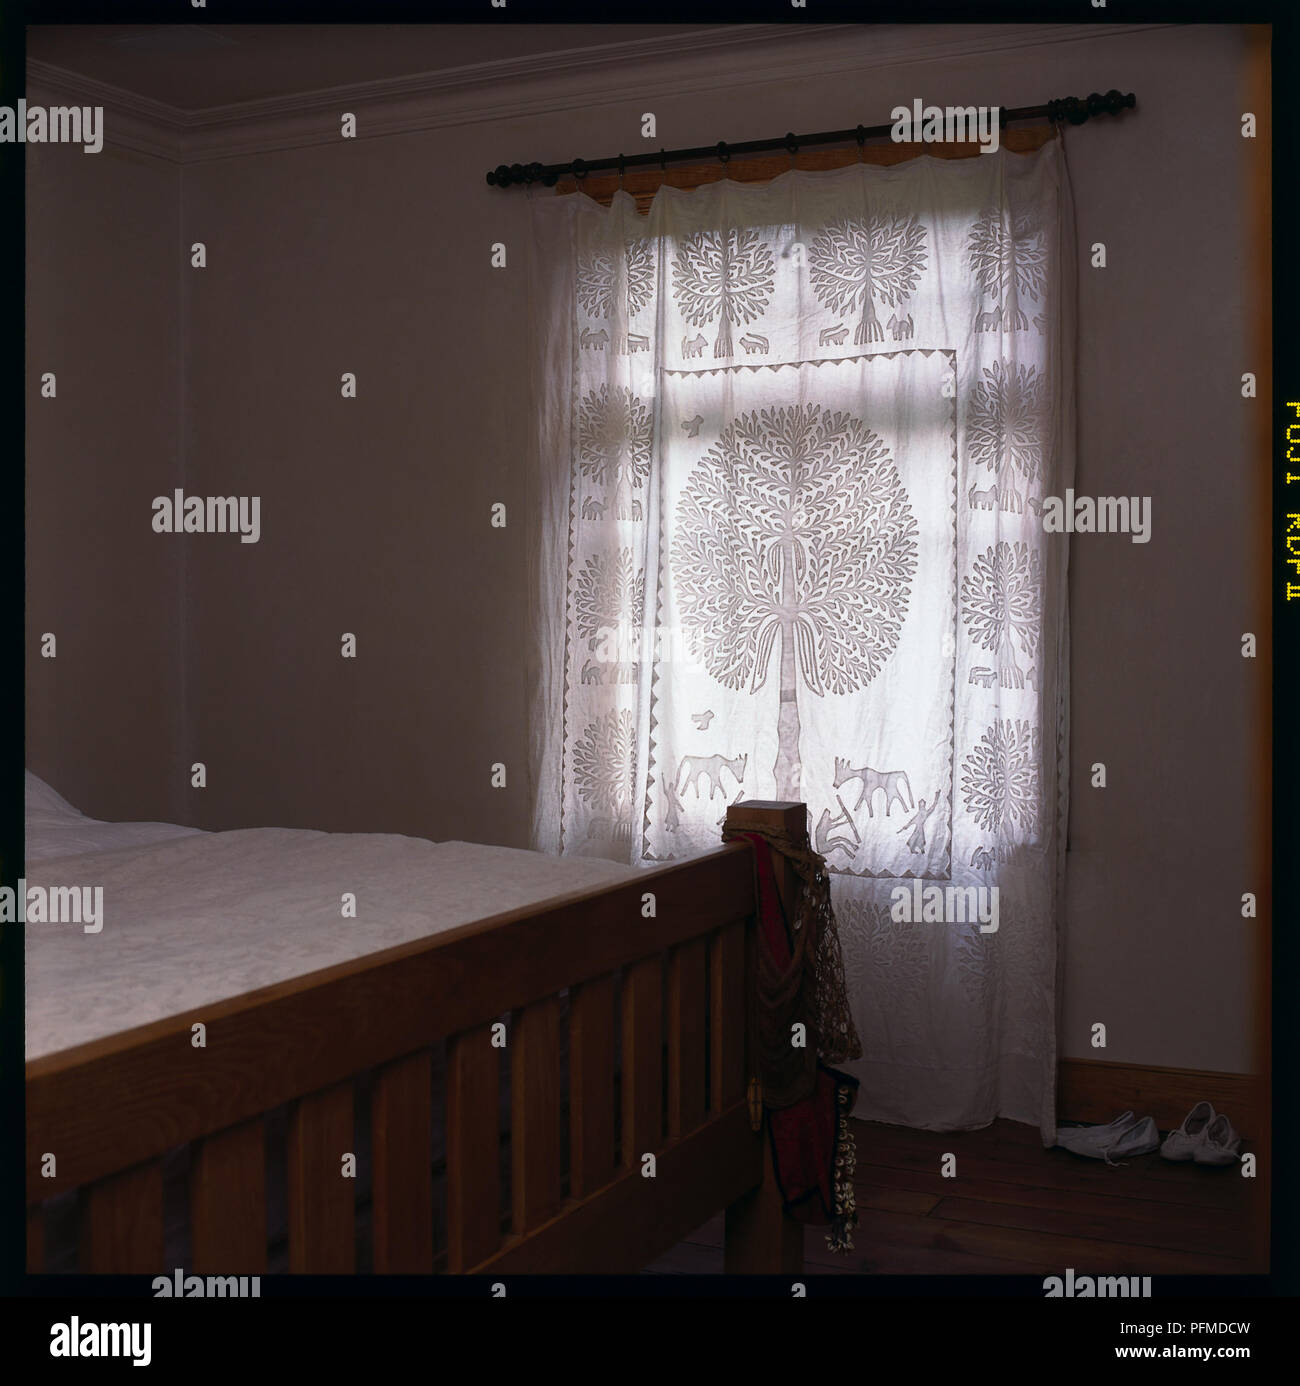 Bedroom Window With Daylight Shining Through Net Curtains Dark Room Wooden Bed Corner In Foreground Stock Photo Alamy